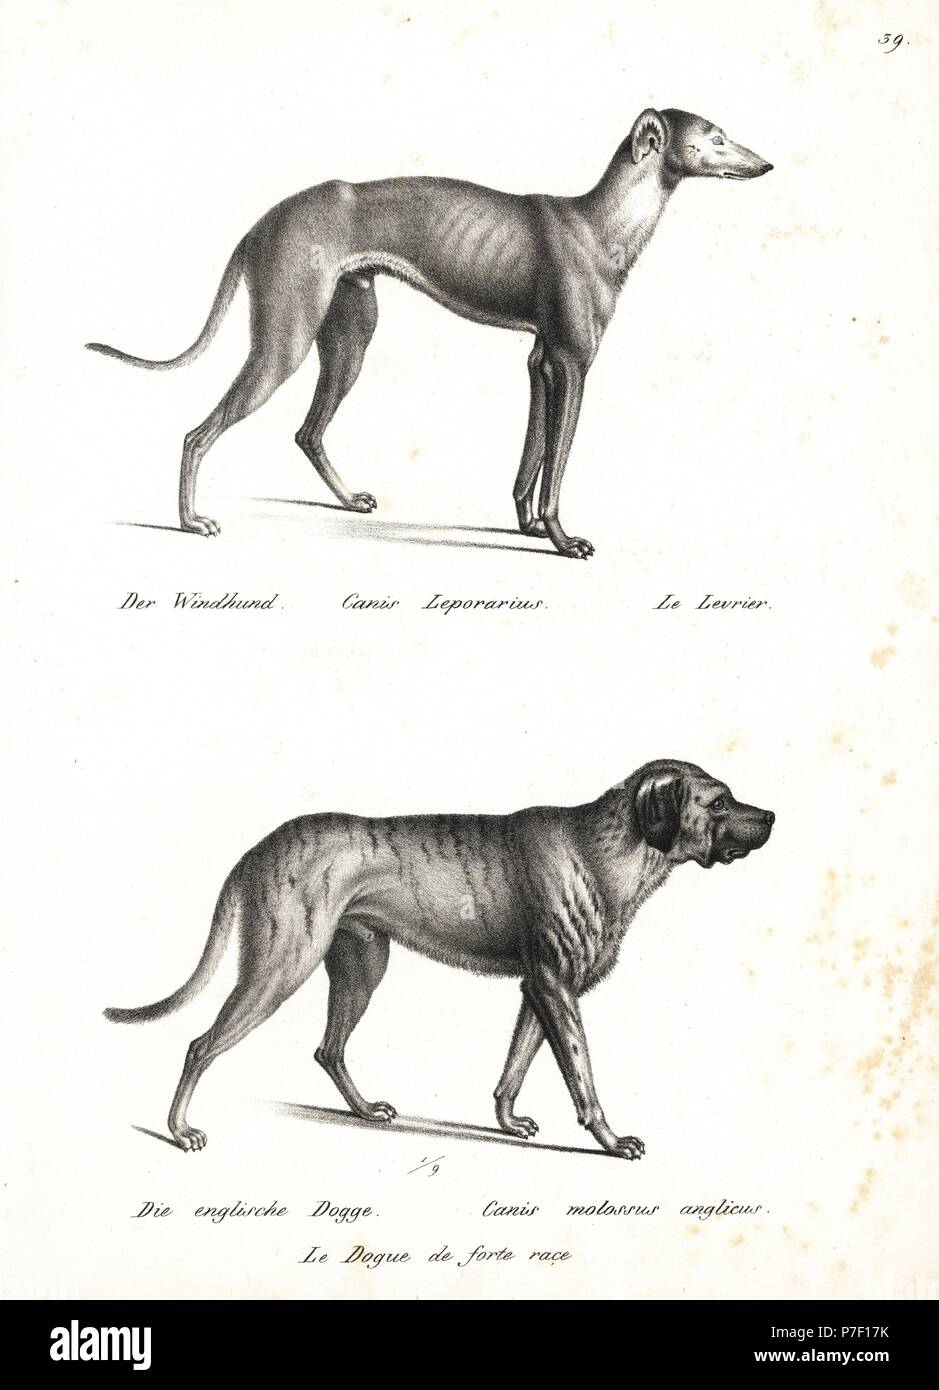 English greyhound, Canis leporarius, and English bulldog, Canis molossus anglicus. Lithograph by Karl Joseph Brodtmann from Heinrich Rudolf Schinz's Illustrated Natural History of Men and Animals, 1836. Stock Photo